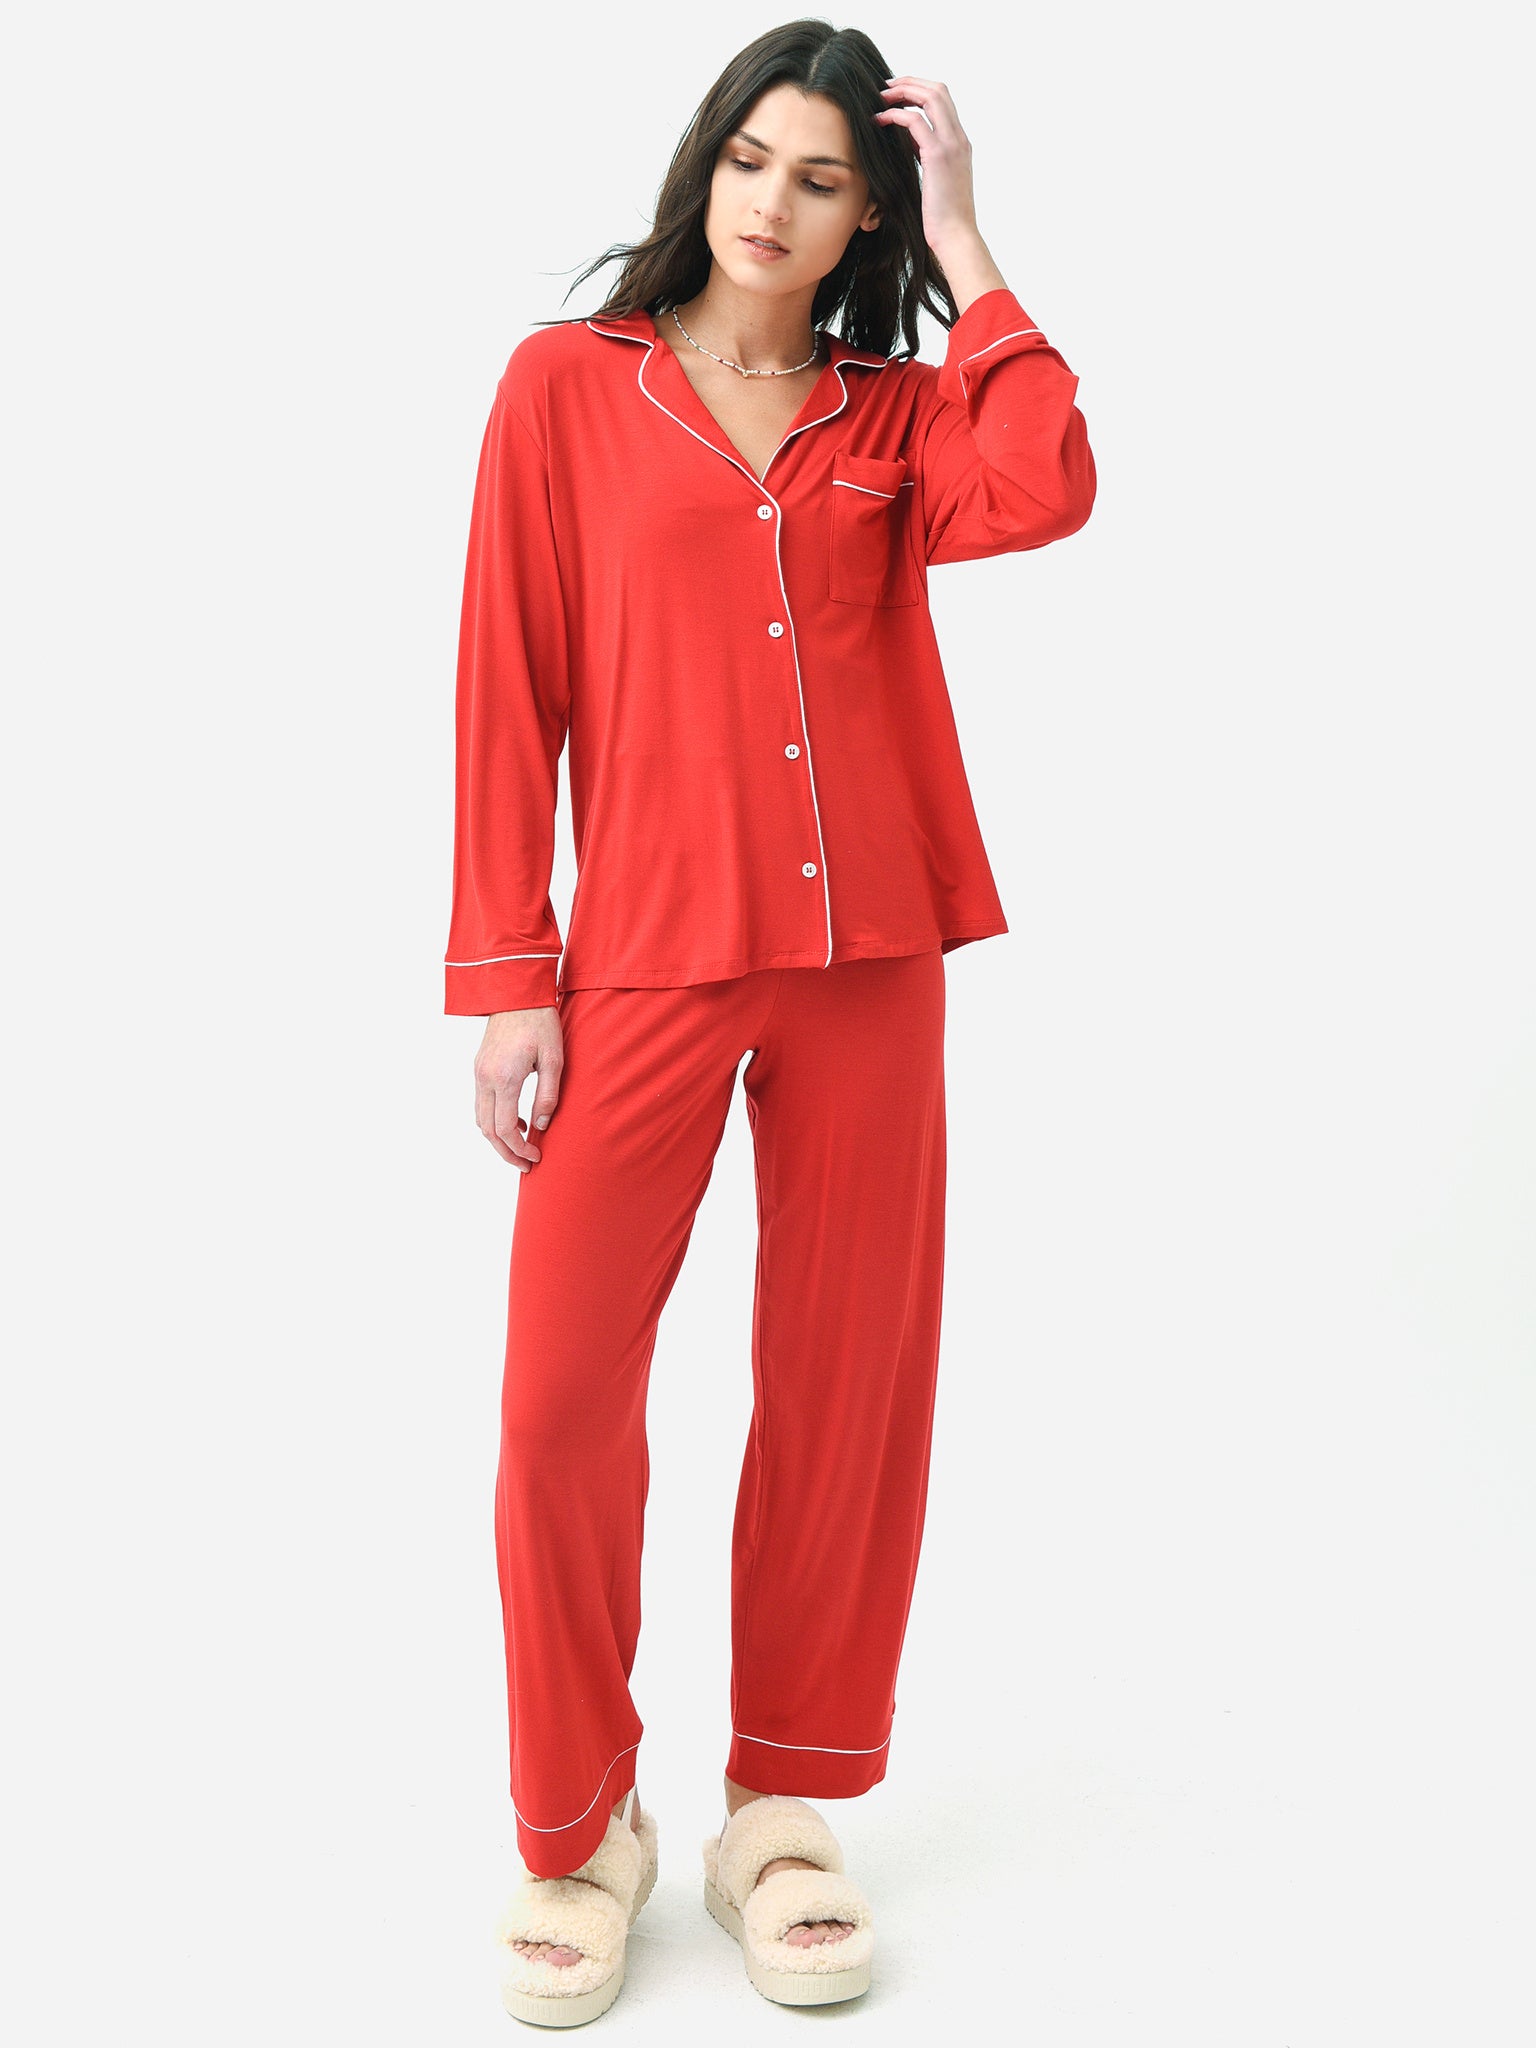 Valentine's Day 2023: Gift these comfy and luxurious Eberjey pajamas